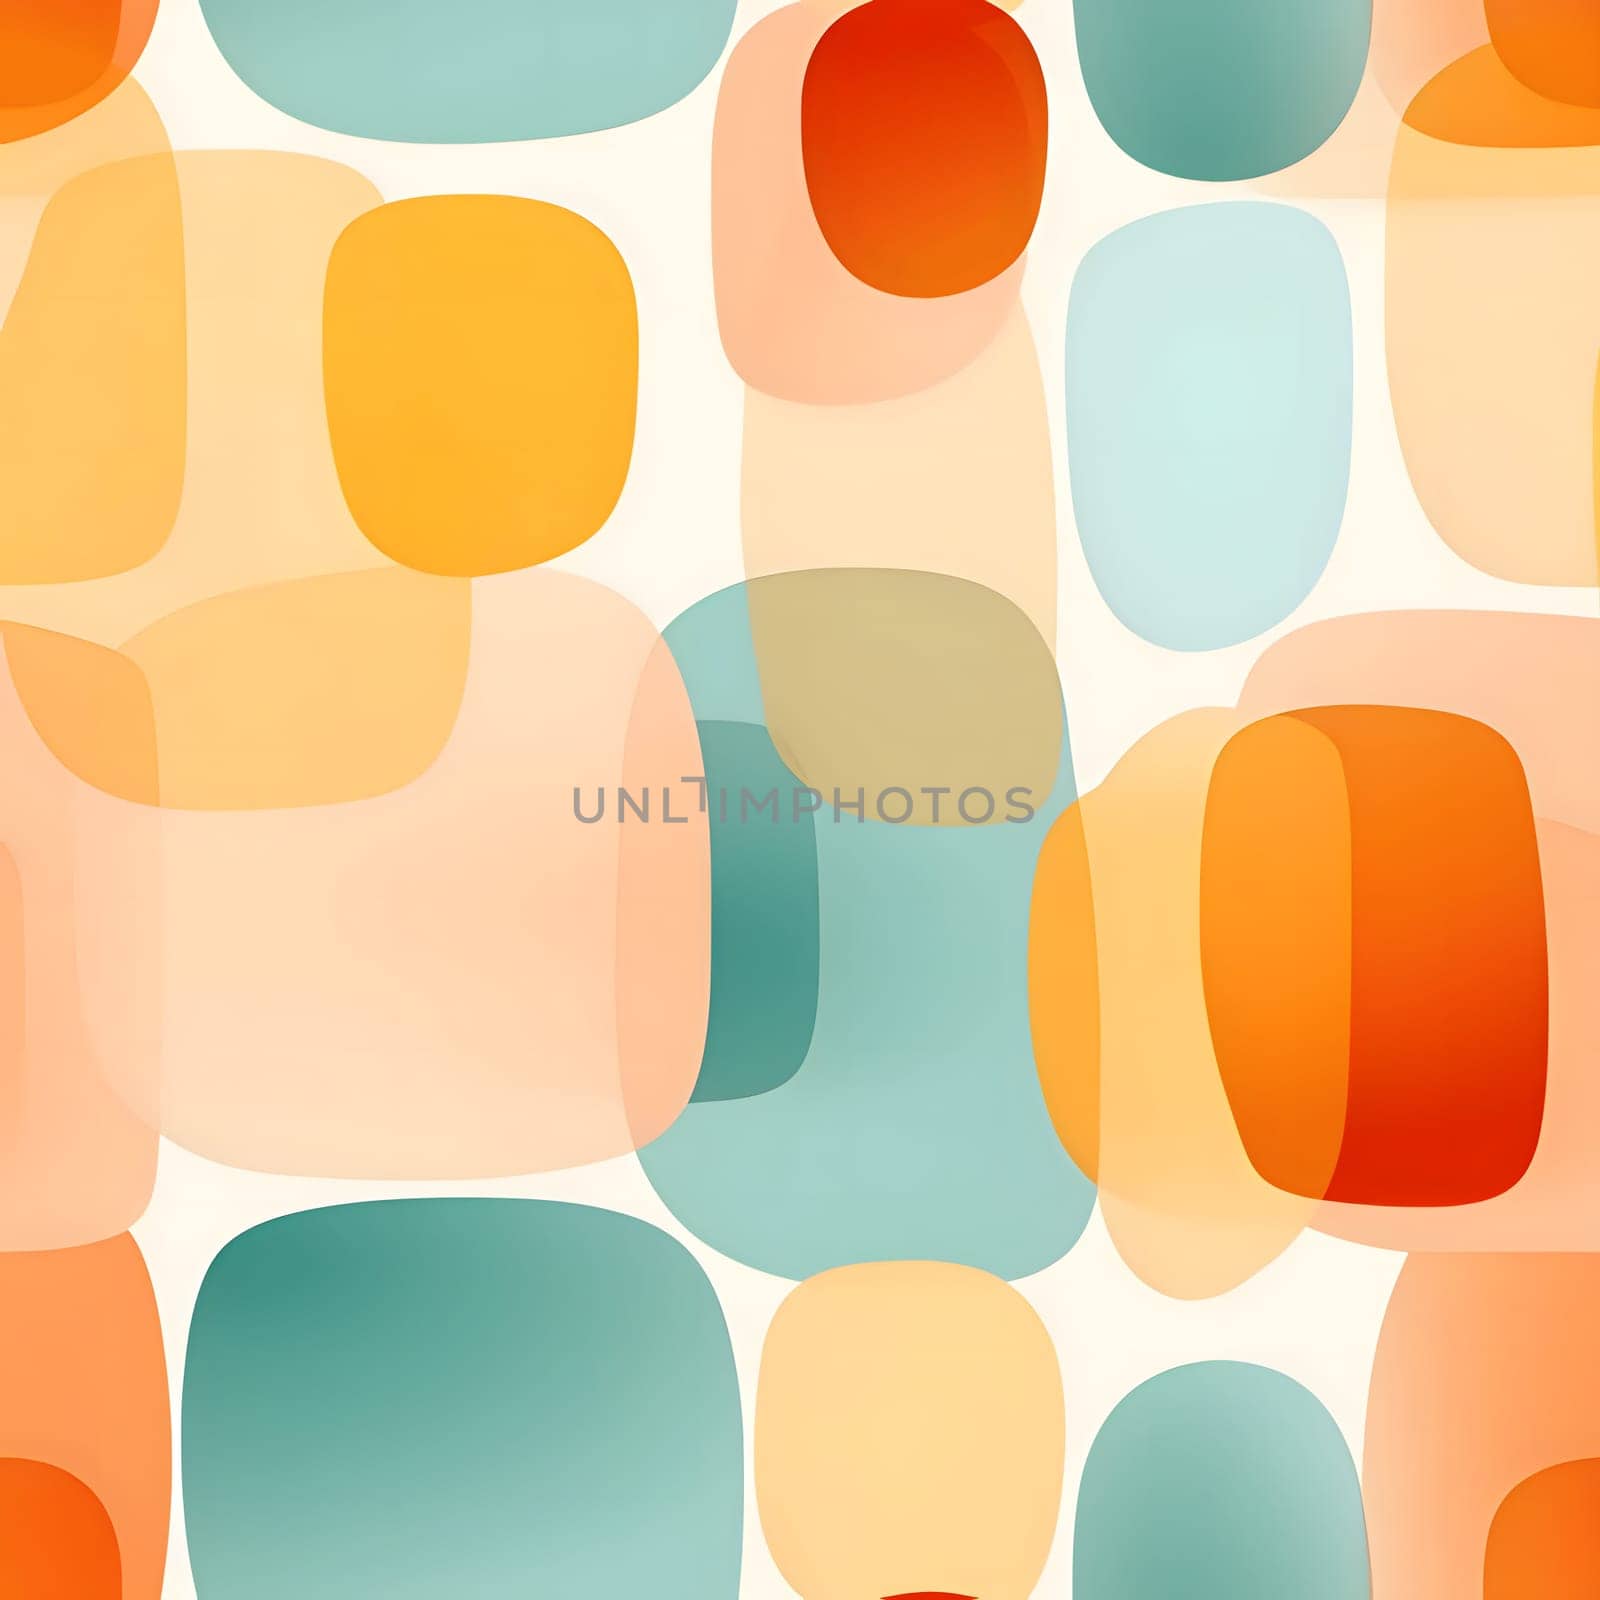 Patterns and banners backgrounds: Seamless background pattern. Abstract geometric pattern with rounded squares.